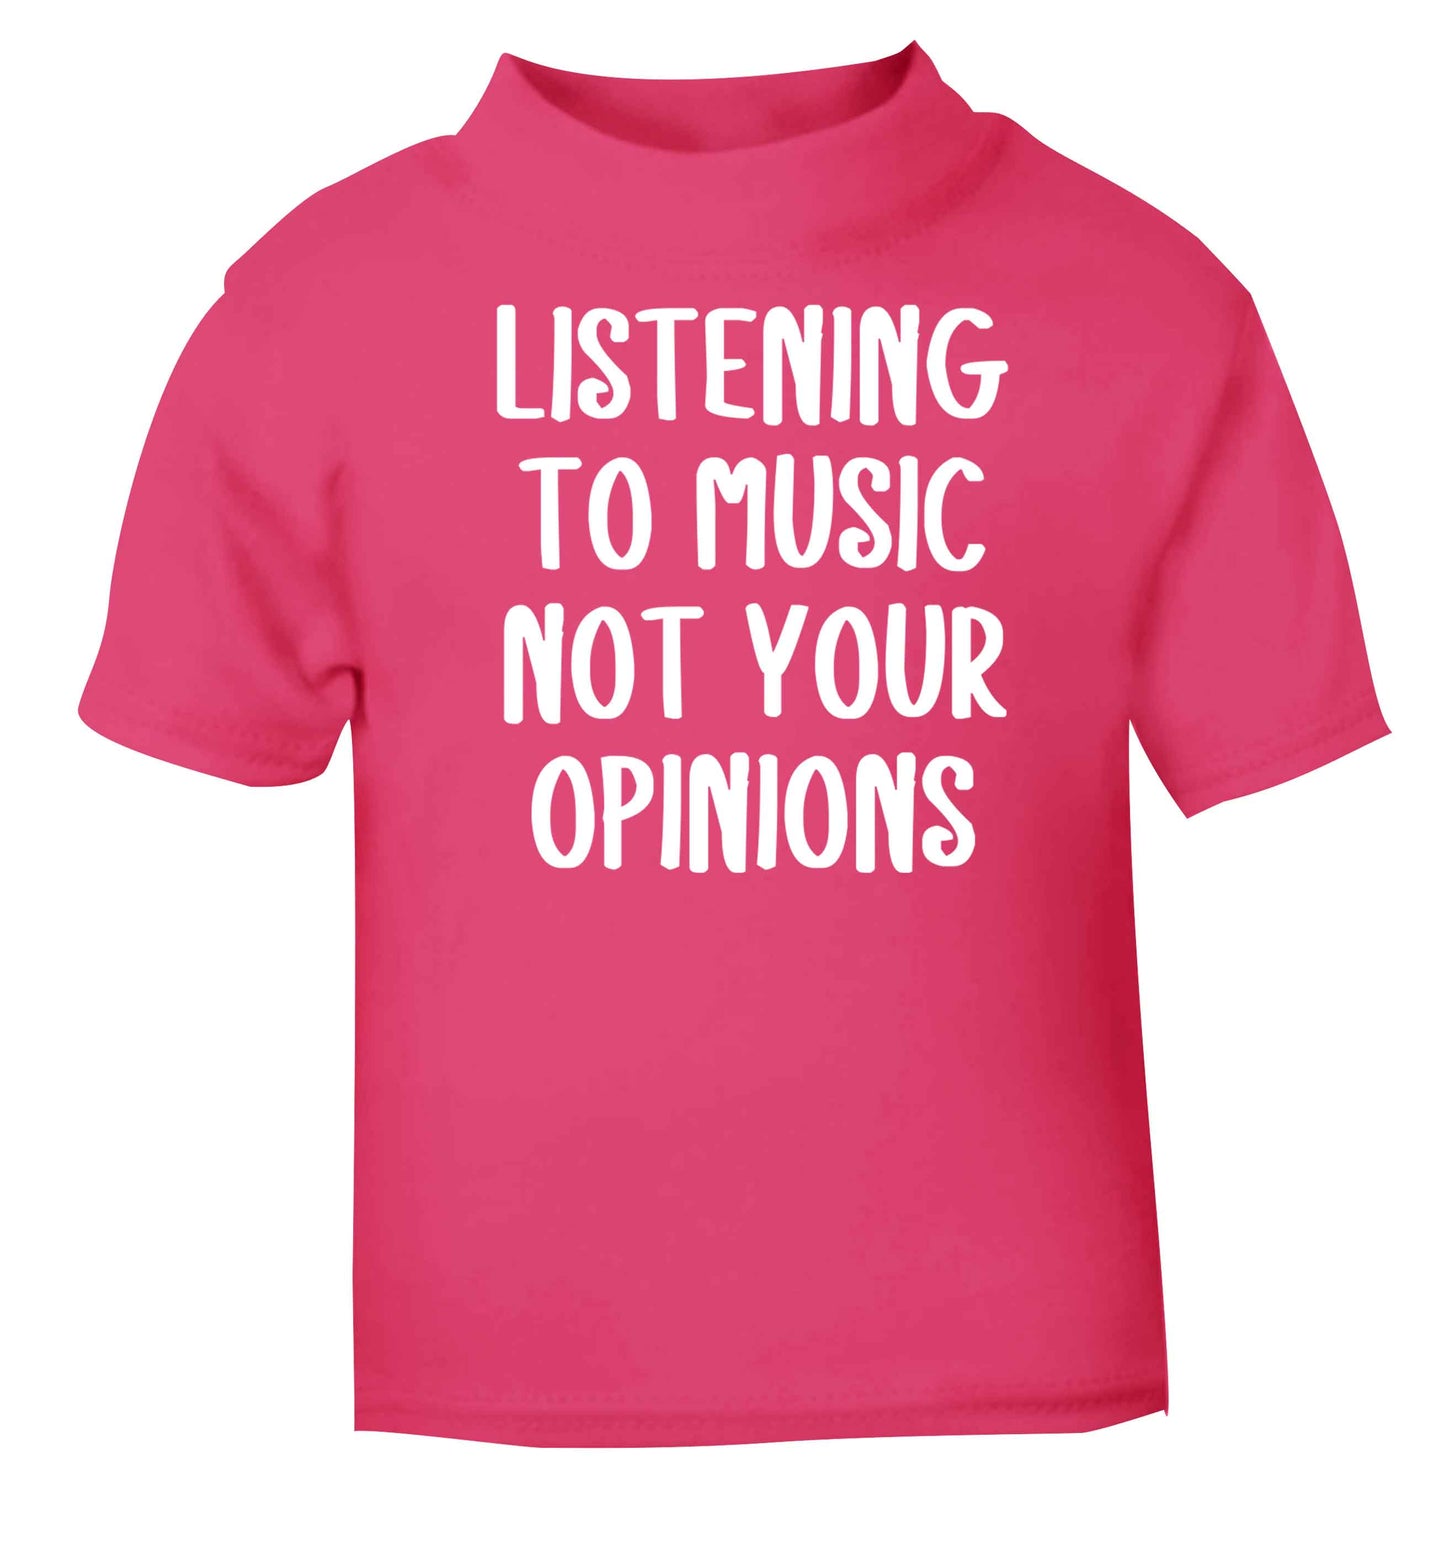 Listening to music not your opinions pink baby toddler Tshirt 2 Years